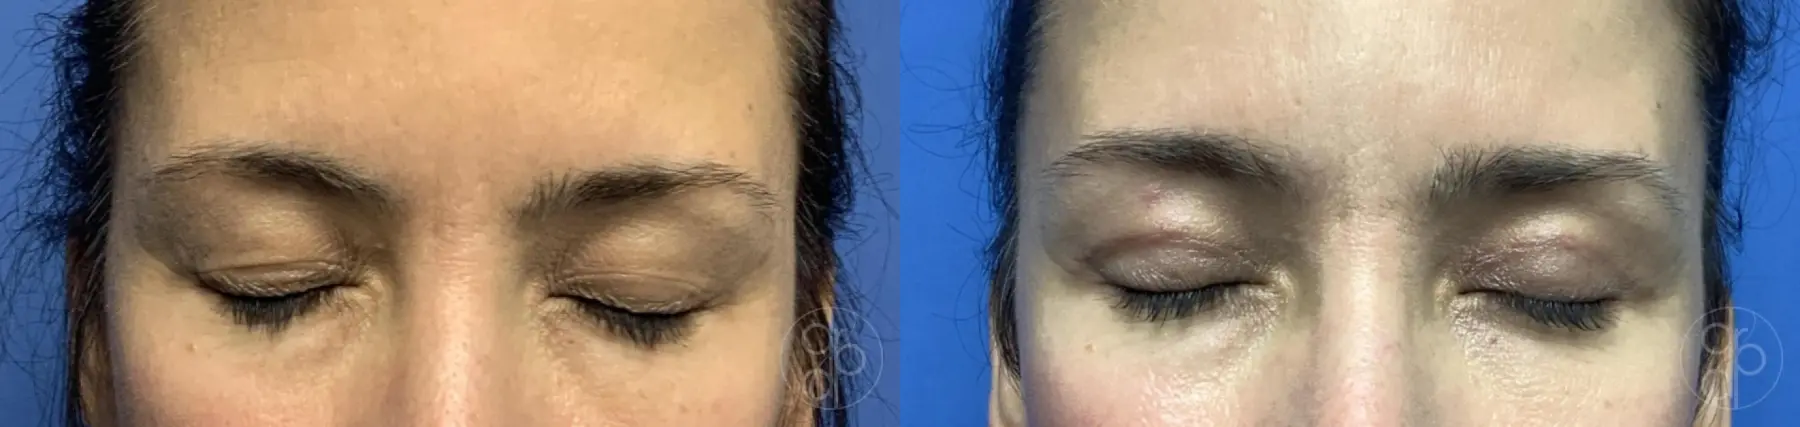 patient 12658 blepharoplasty before and after result - Before and After